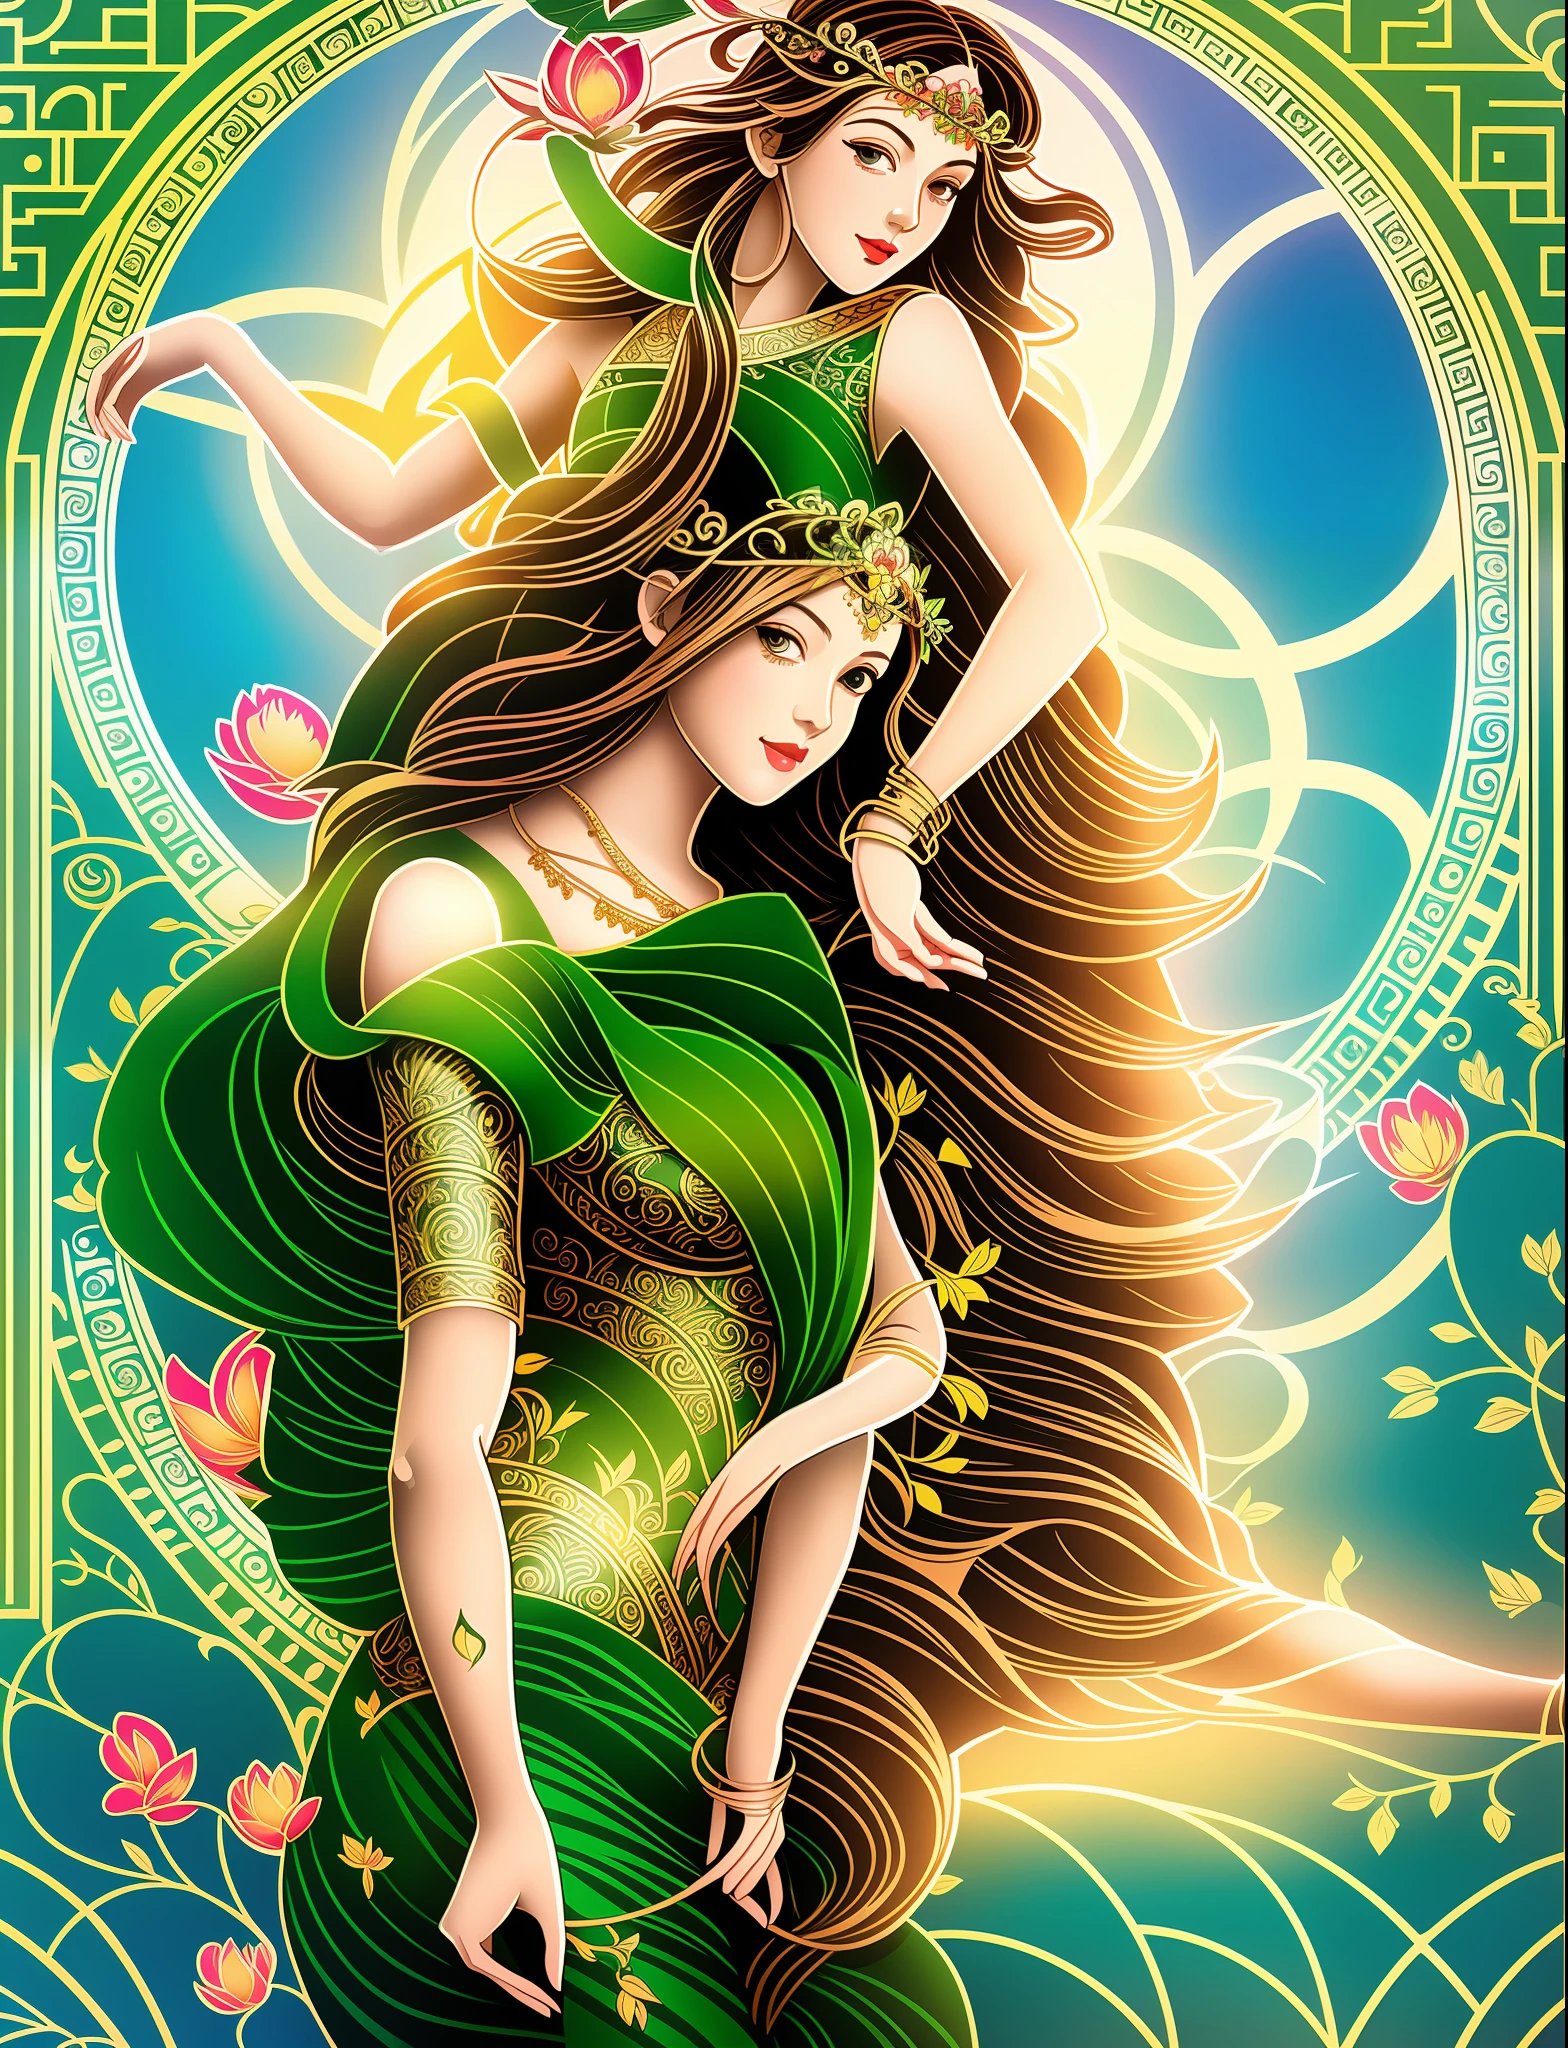 Close-up of a woman wearing a flower crown，Perfect body structure，There are green leaves and flower crowns on the hair, The beautiful body is surrounded by decorative patterns，Green vines accompanied by flowers，The body has light and dark shadows，The background picture is colorful，Full of geometric decorative patterns，romanticism lain，art nouveau illustration, venus goddess, mucha style 4k, art nuveau, Art Nouveau masterpiece, Fresh Art Nouveau, anime art nouveau, persephone in spring,